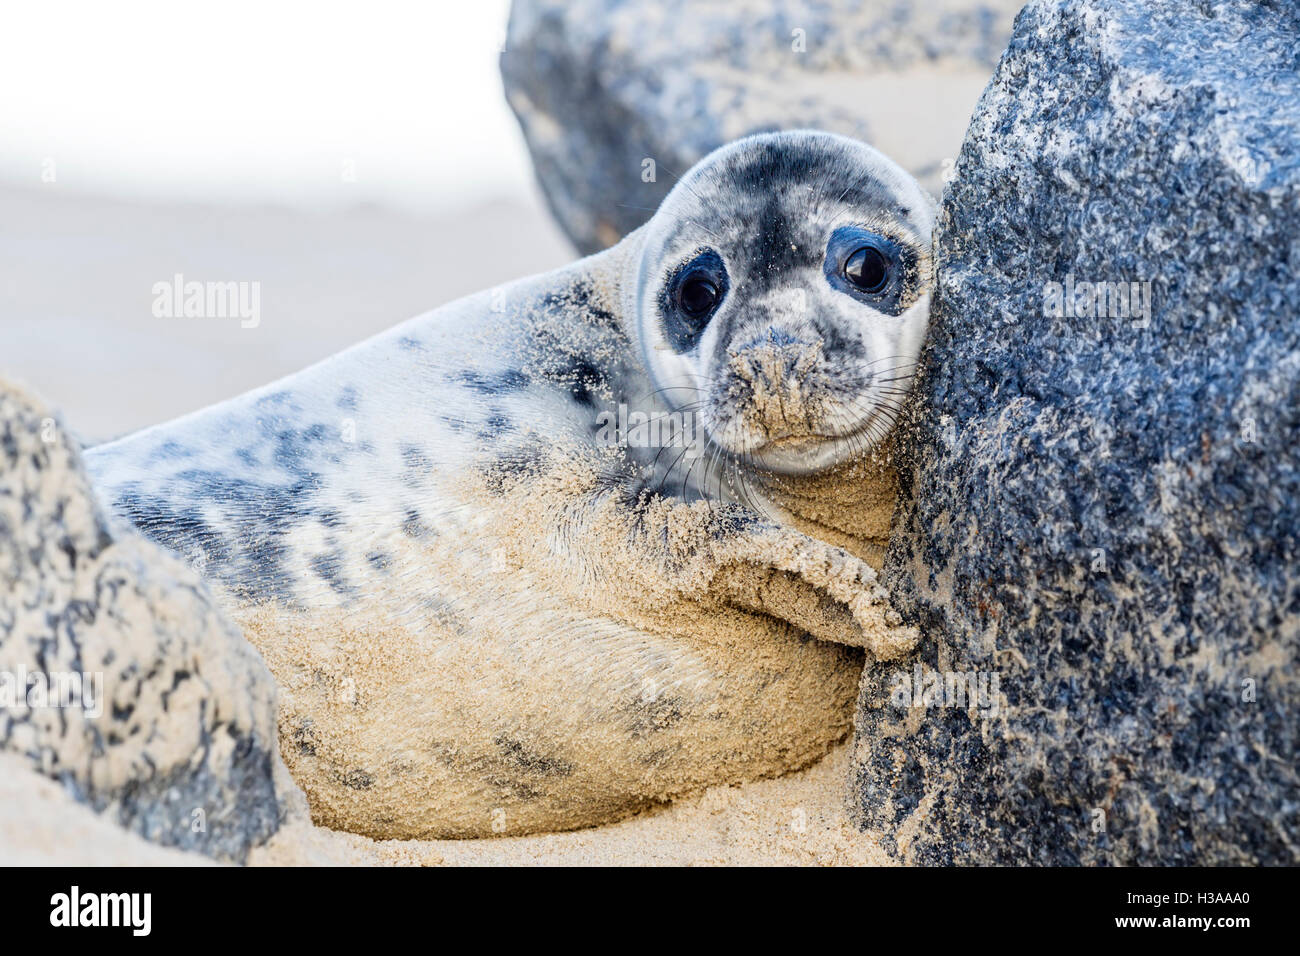 A Grey seal pup rests on a beach, North Sea coast, Norfolk, England Stock Photo